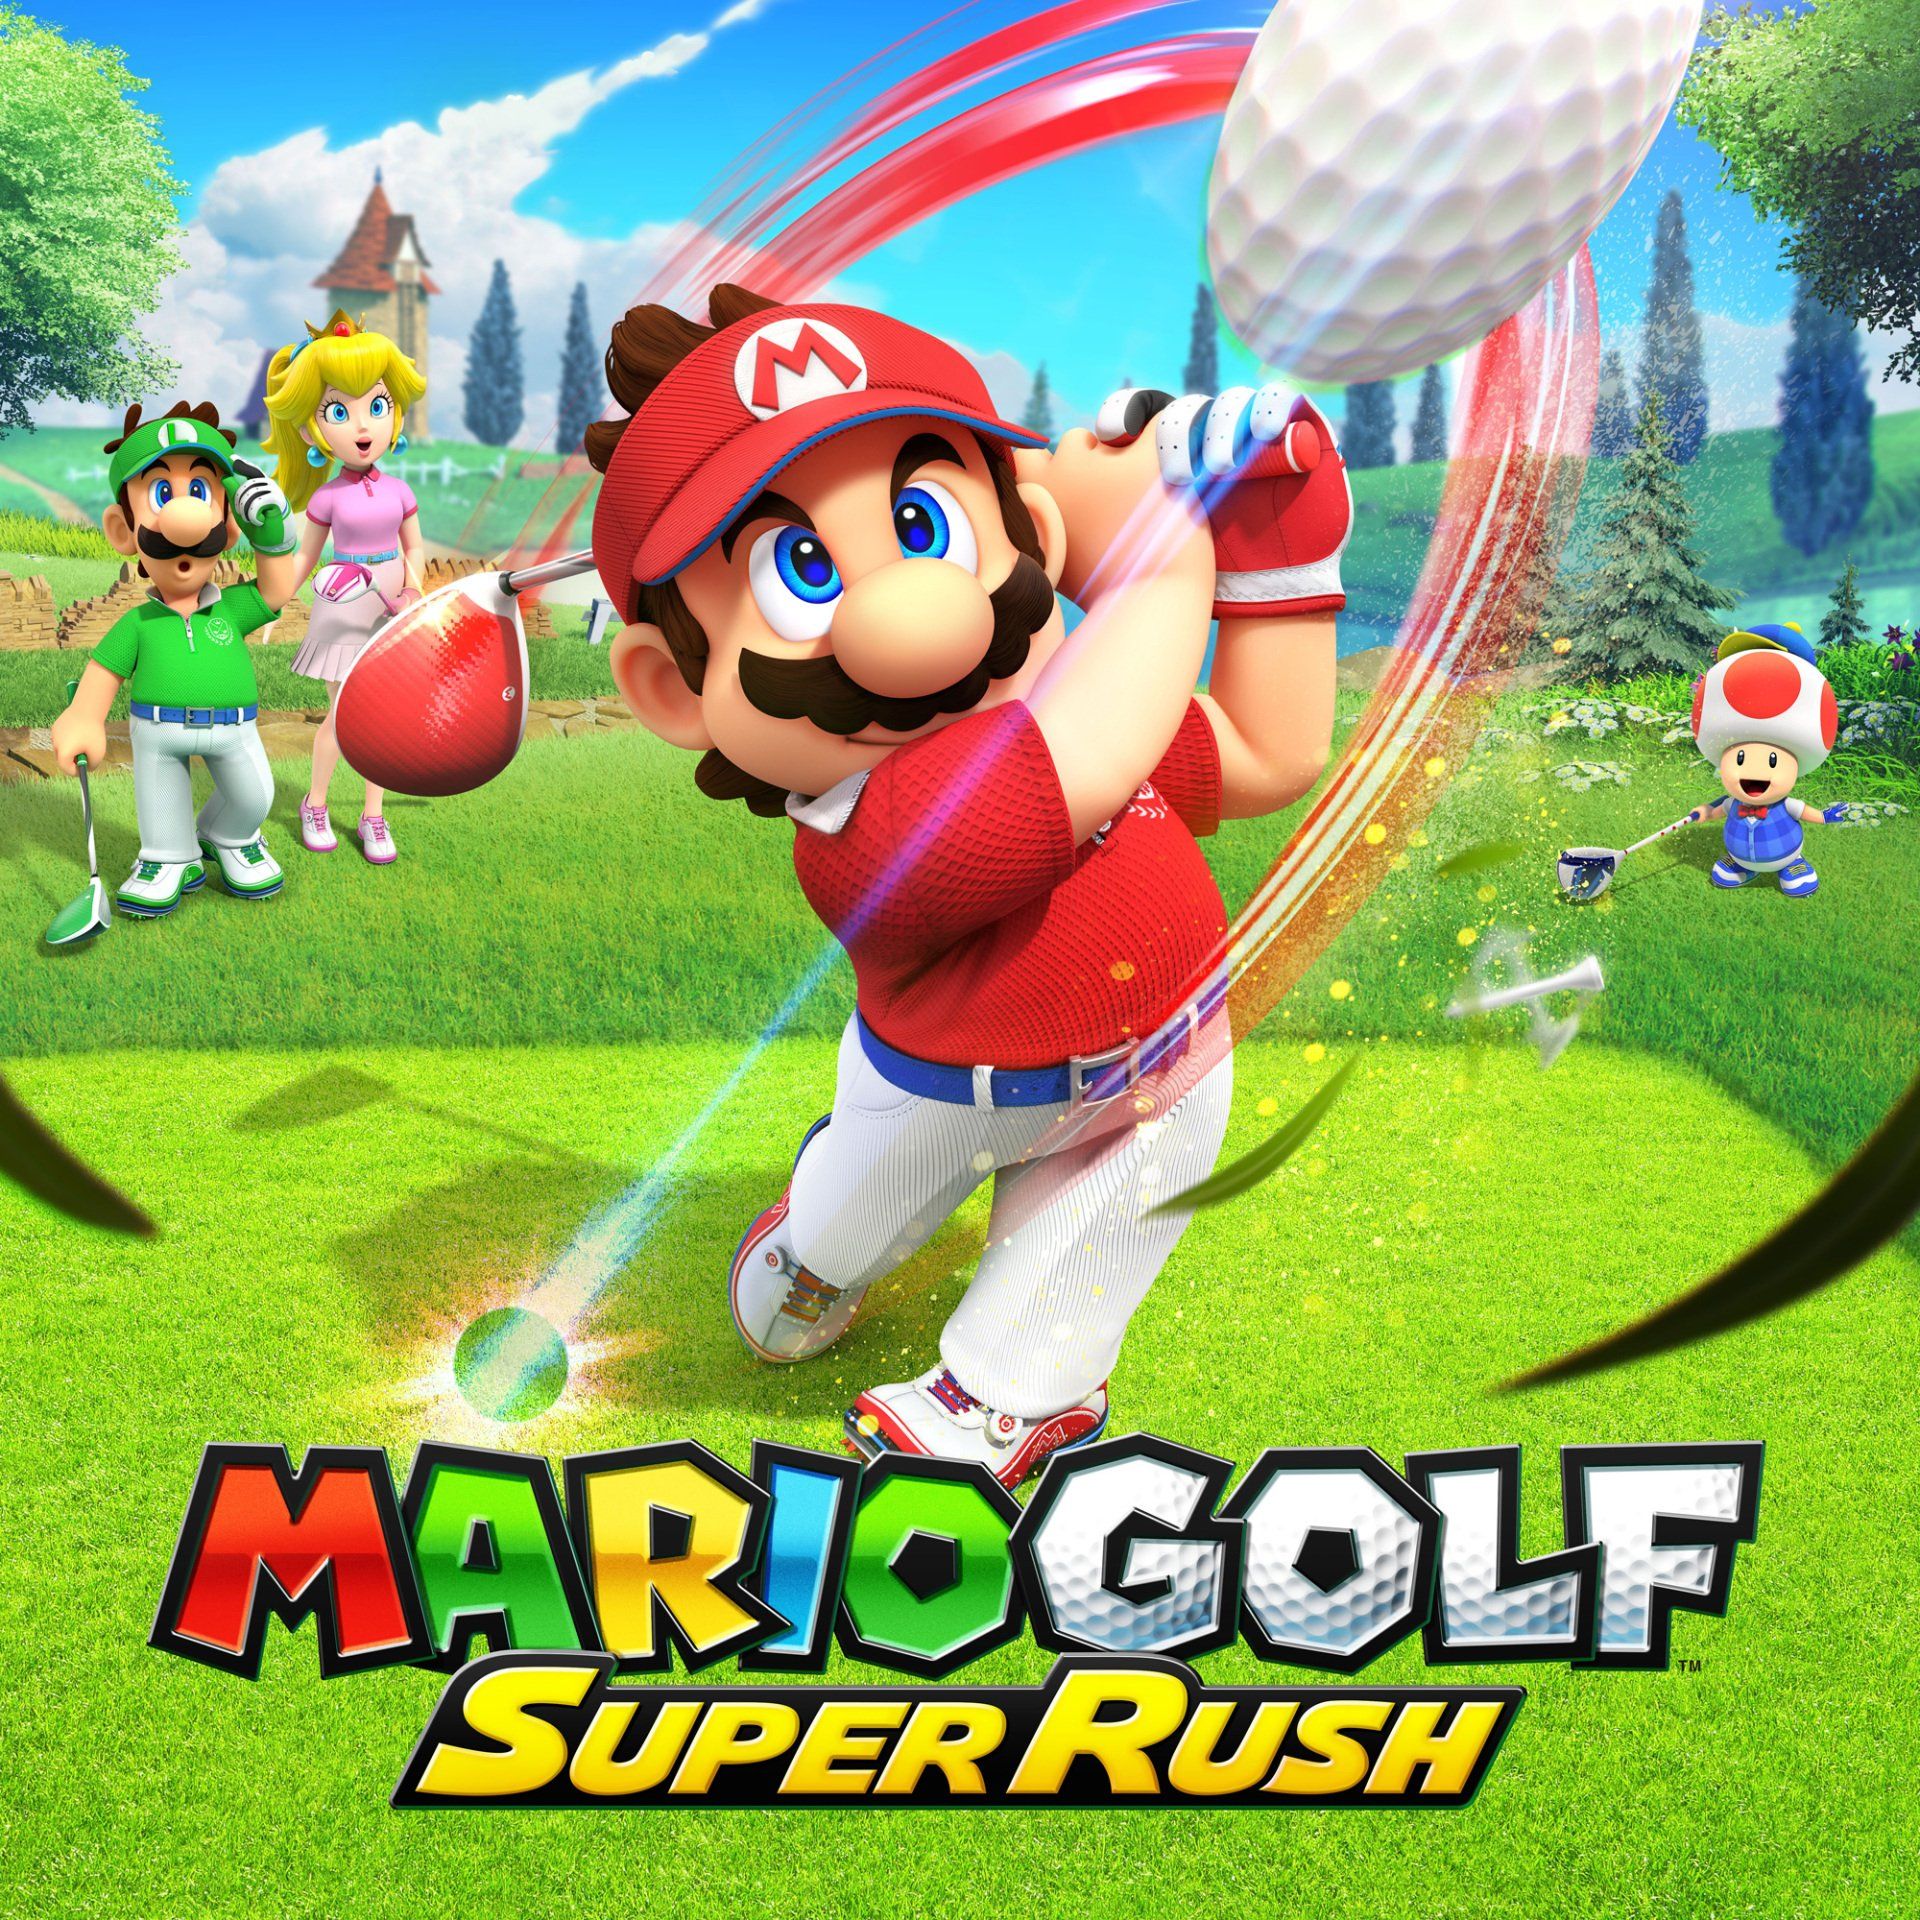 Game review; Mario golf super rush (switch)